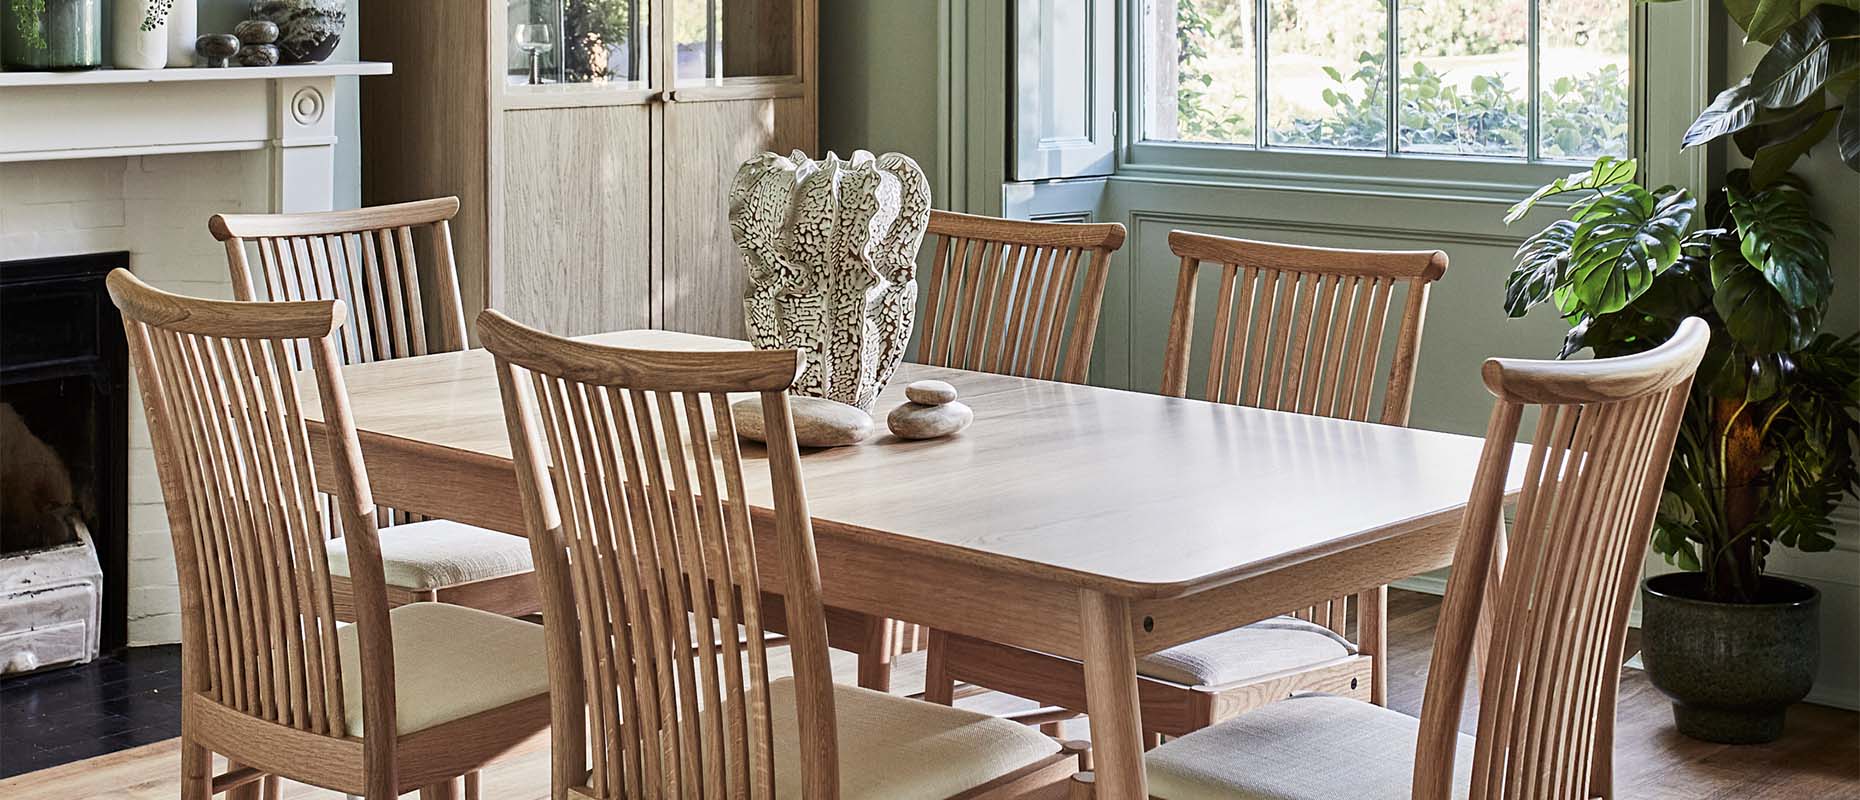 Teramo Dining collection by ercol at Forrest Furnishing